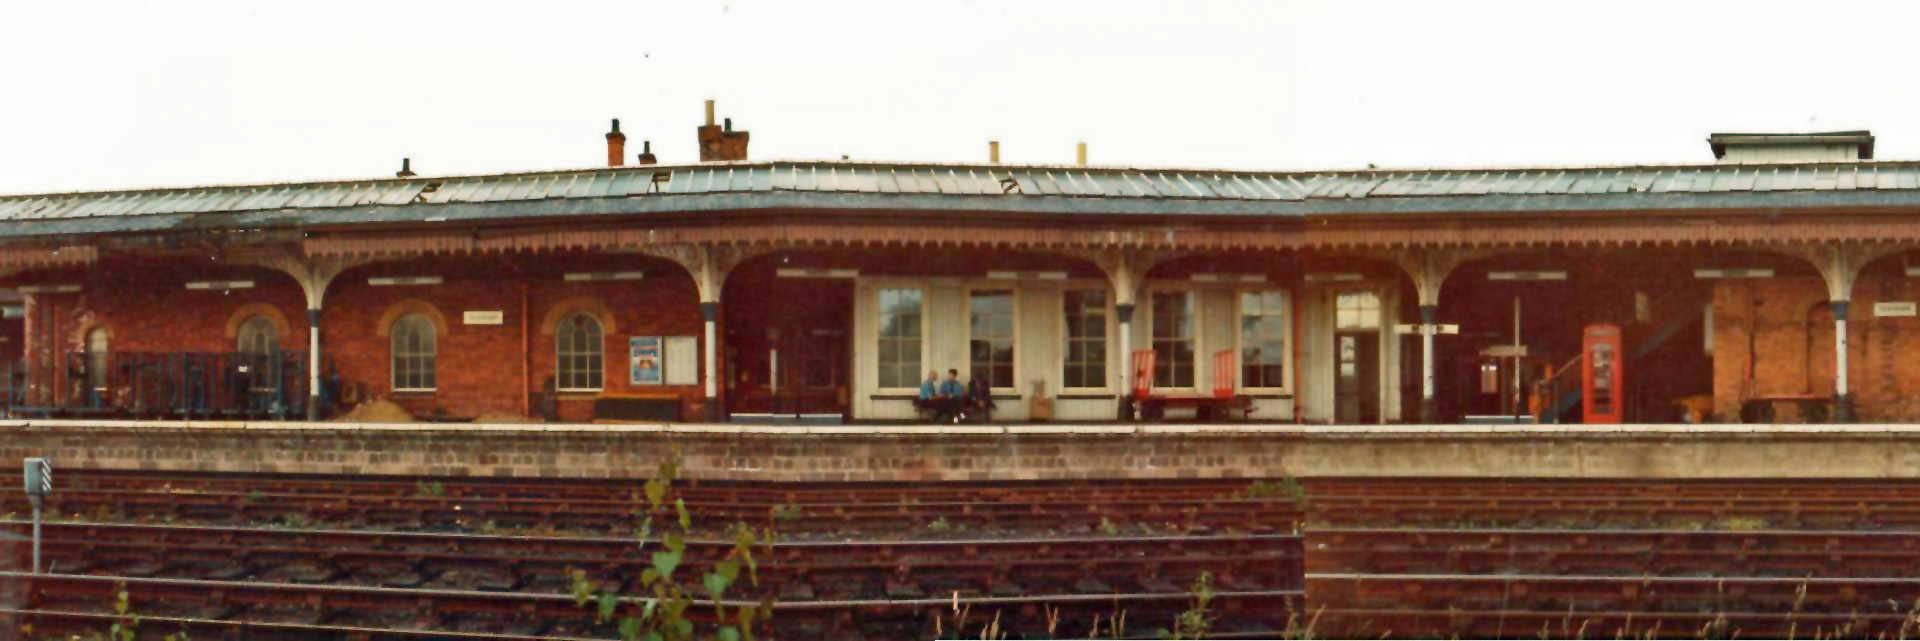 A composite view of the central section of the buildings on the western platform. Photograph lent by Roy Vinter.